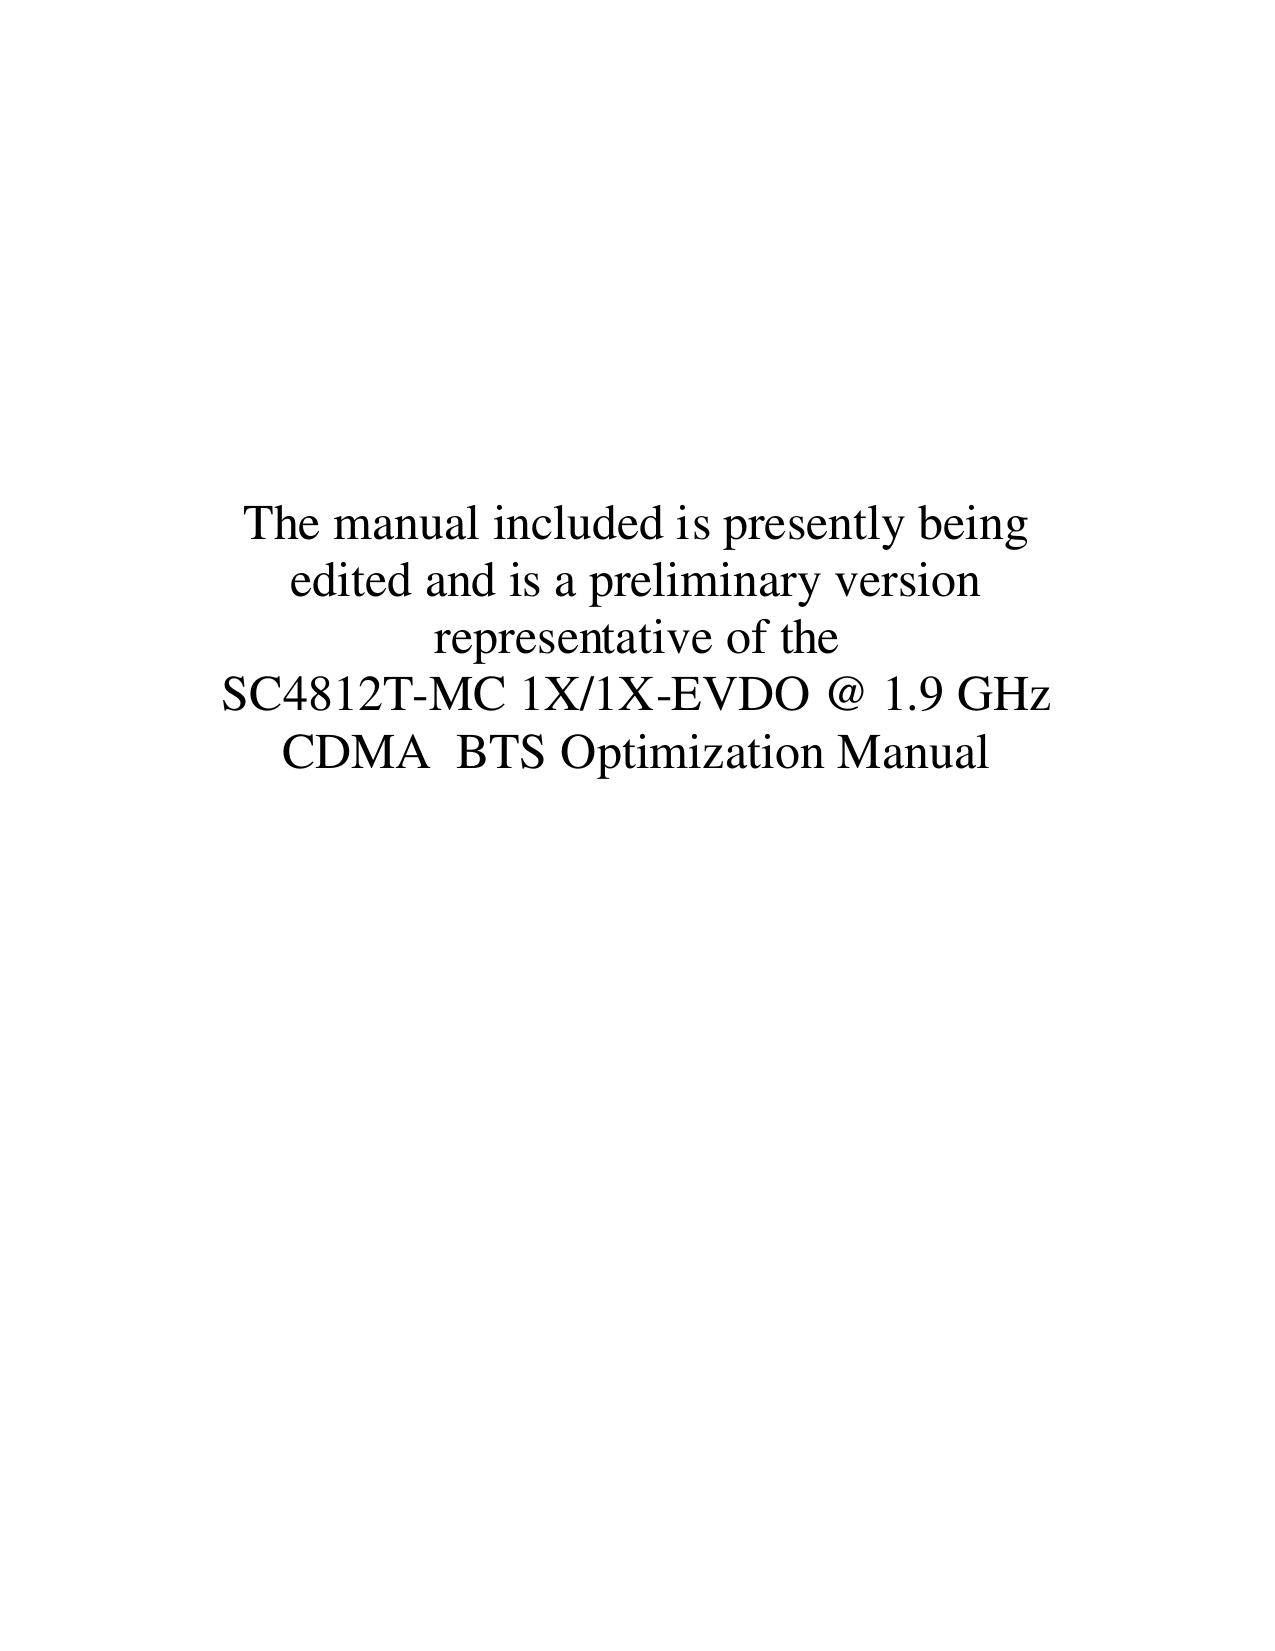       The manual included is presently being edited and is a preliminary version representative of the  SC4812T-MC 1X/1X-EVDO @ 1.9 GHz CDMA  BTS Optimization Manual 